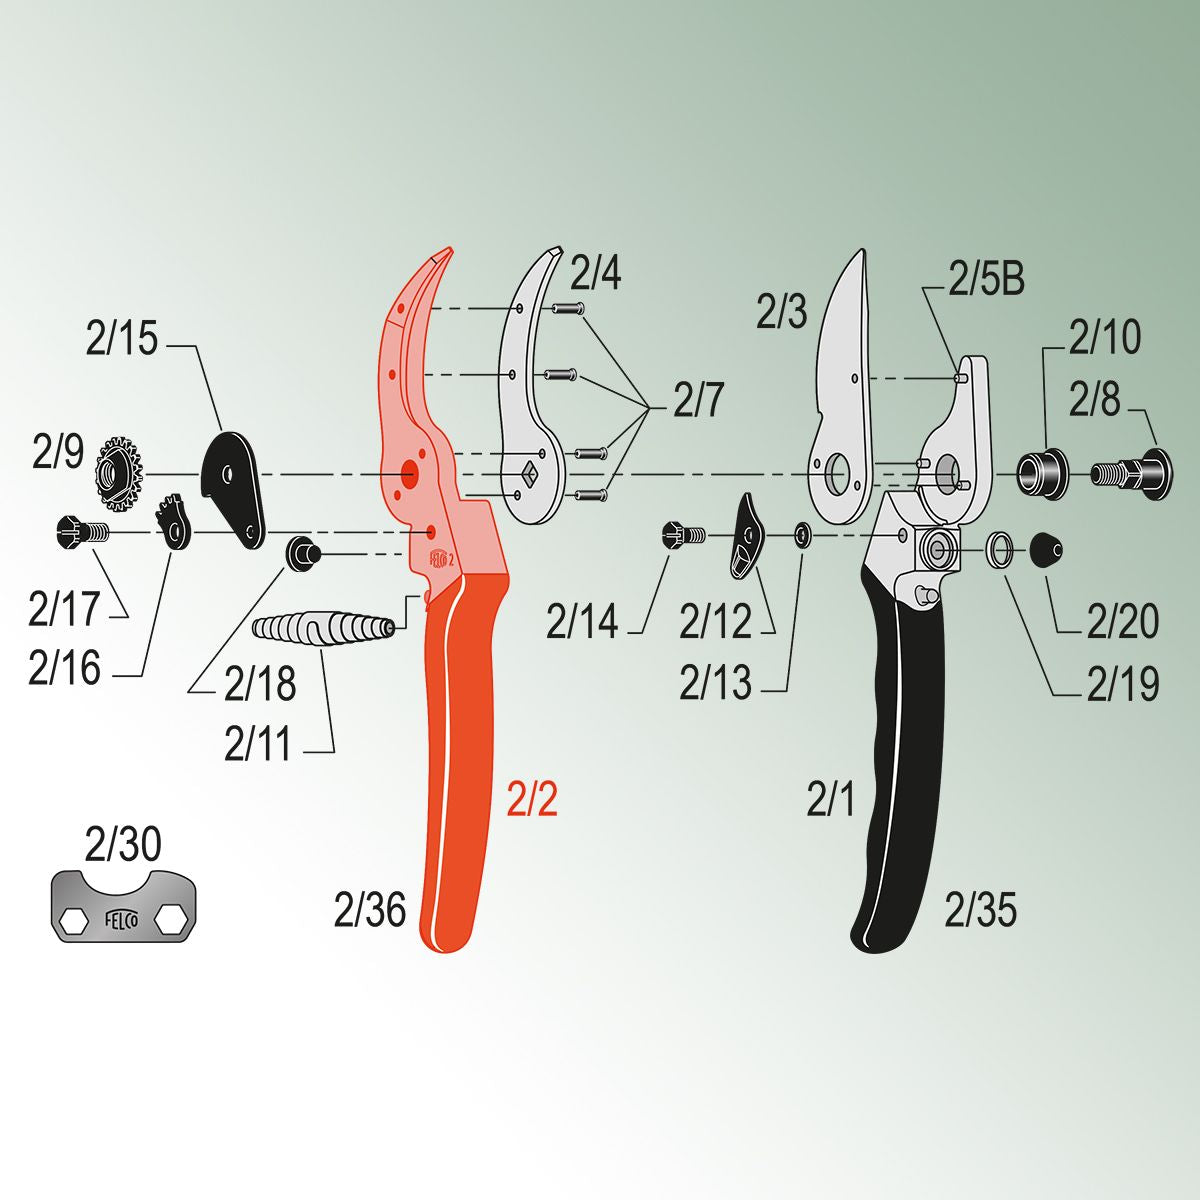 Felco Handle with Counterblade for Model 2